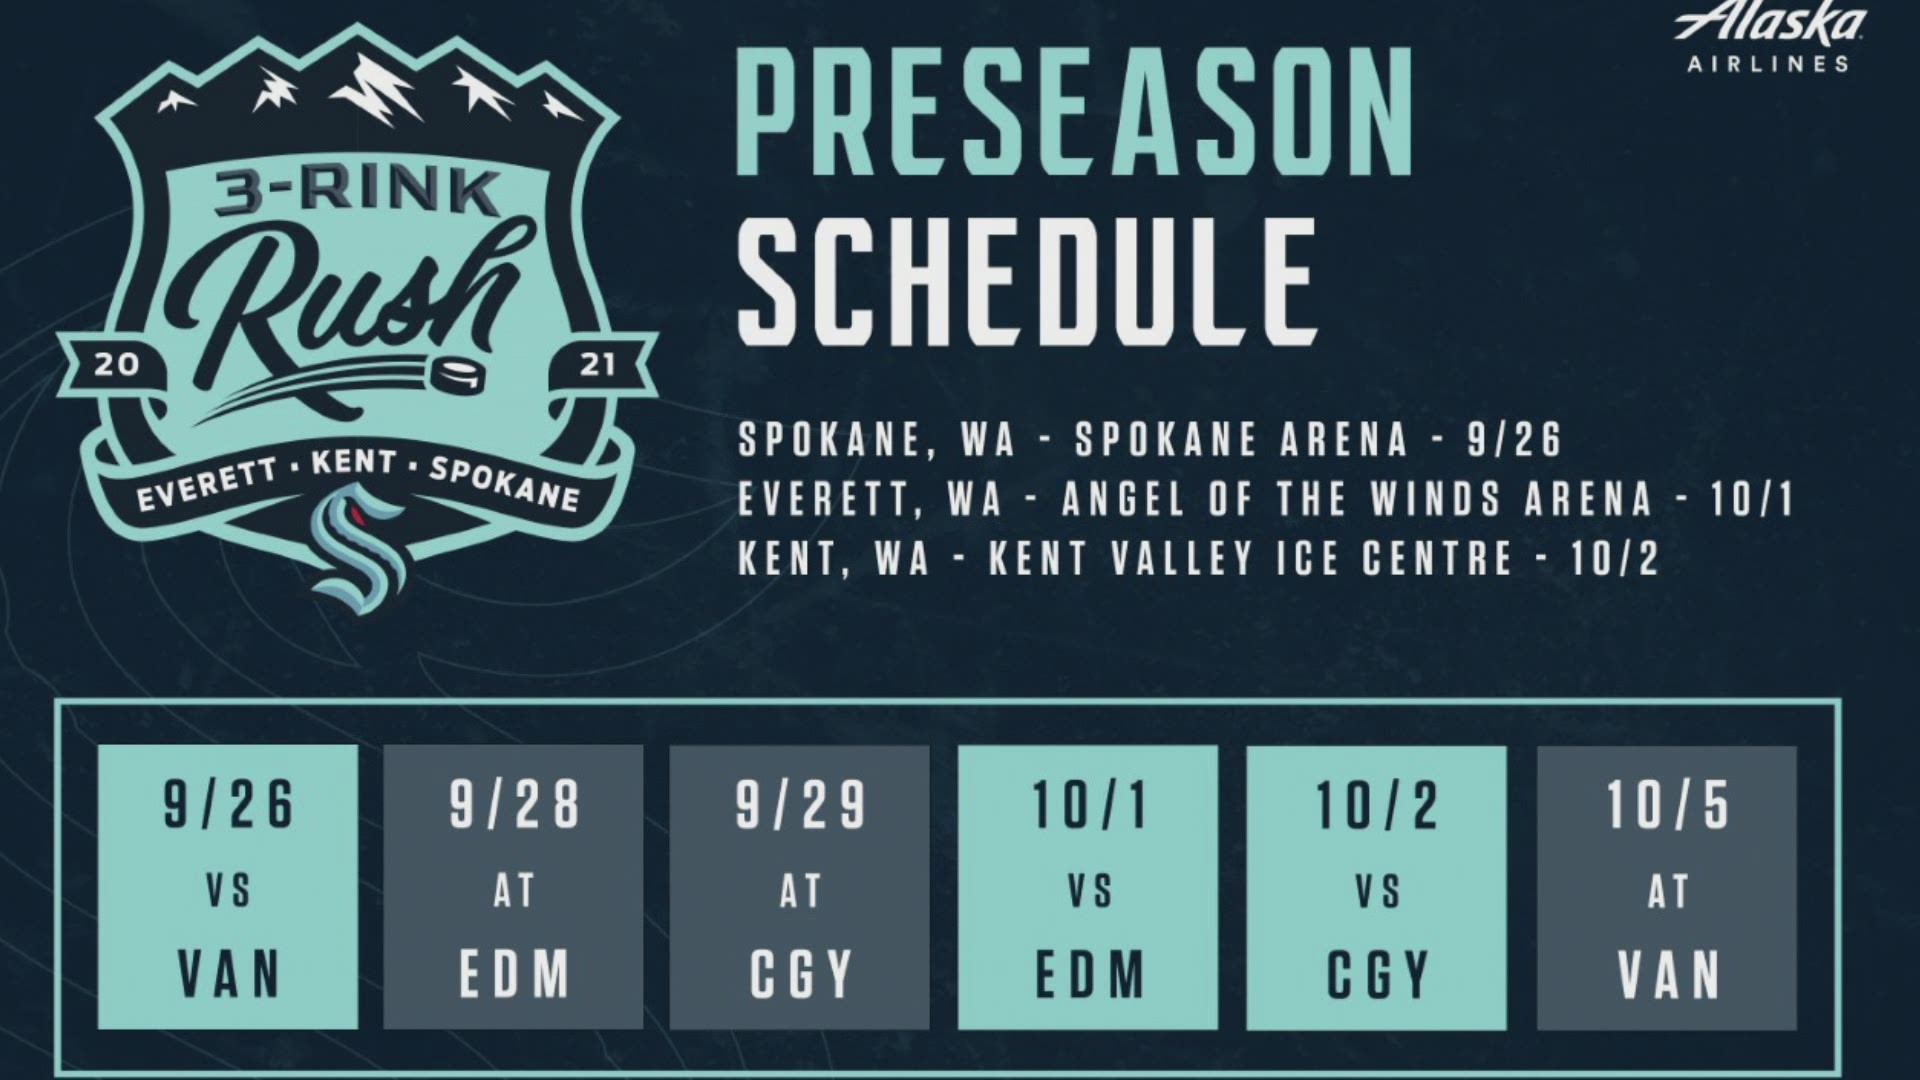 The Seattle Kraken announced their inaugural preseason schedule Friday, which includes three “home” games that will be played at locations across Washington state.